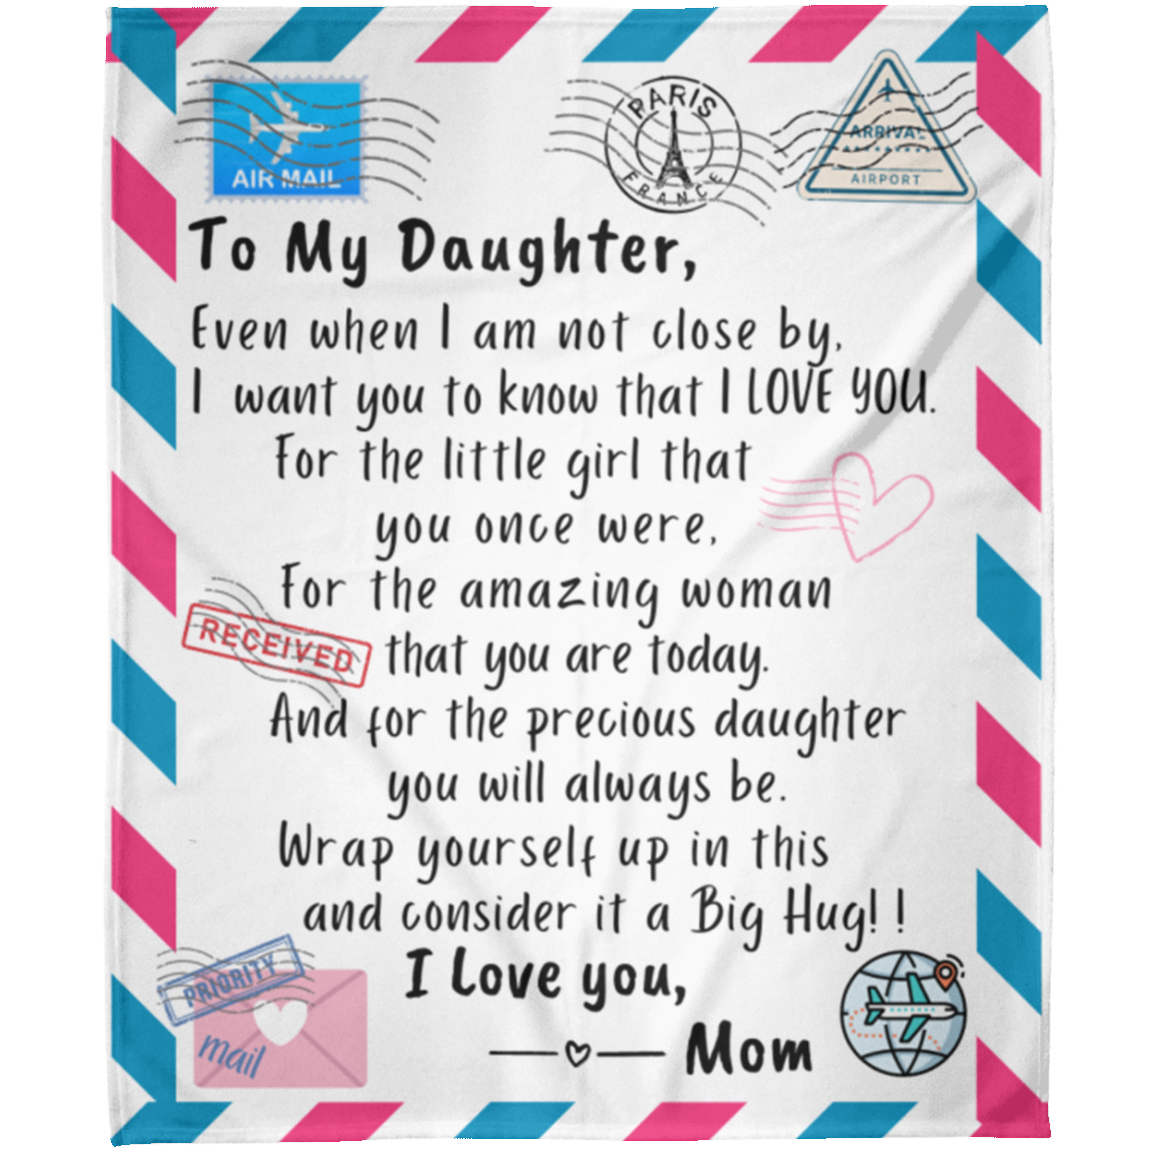 To My Daughter from Mom - Close (1) Fleece Blanket 50x60